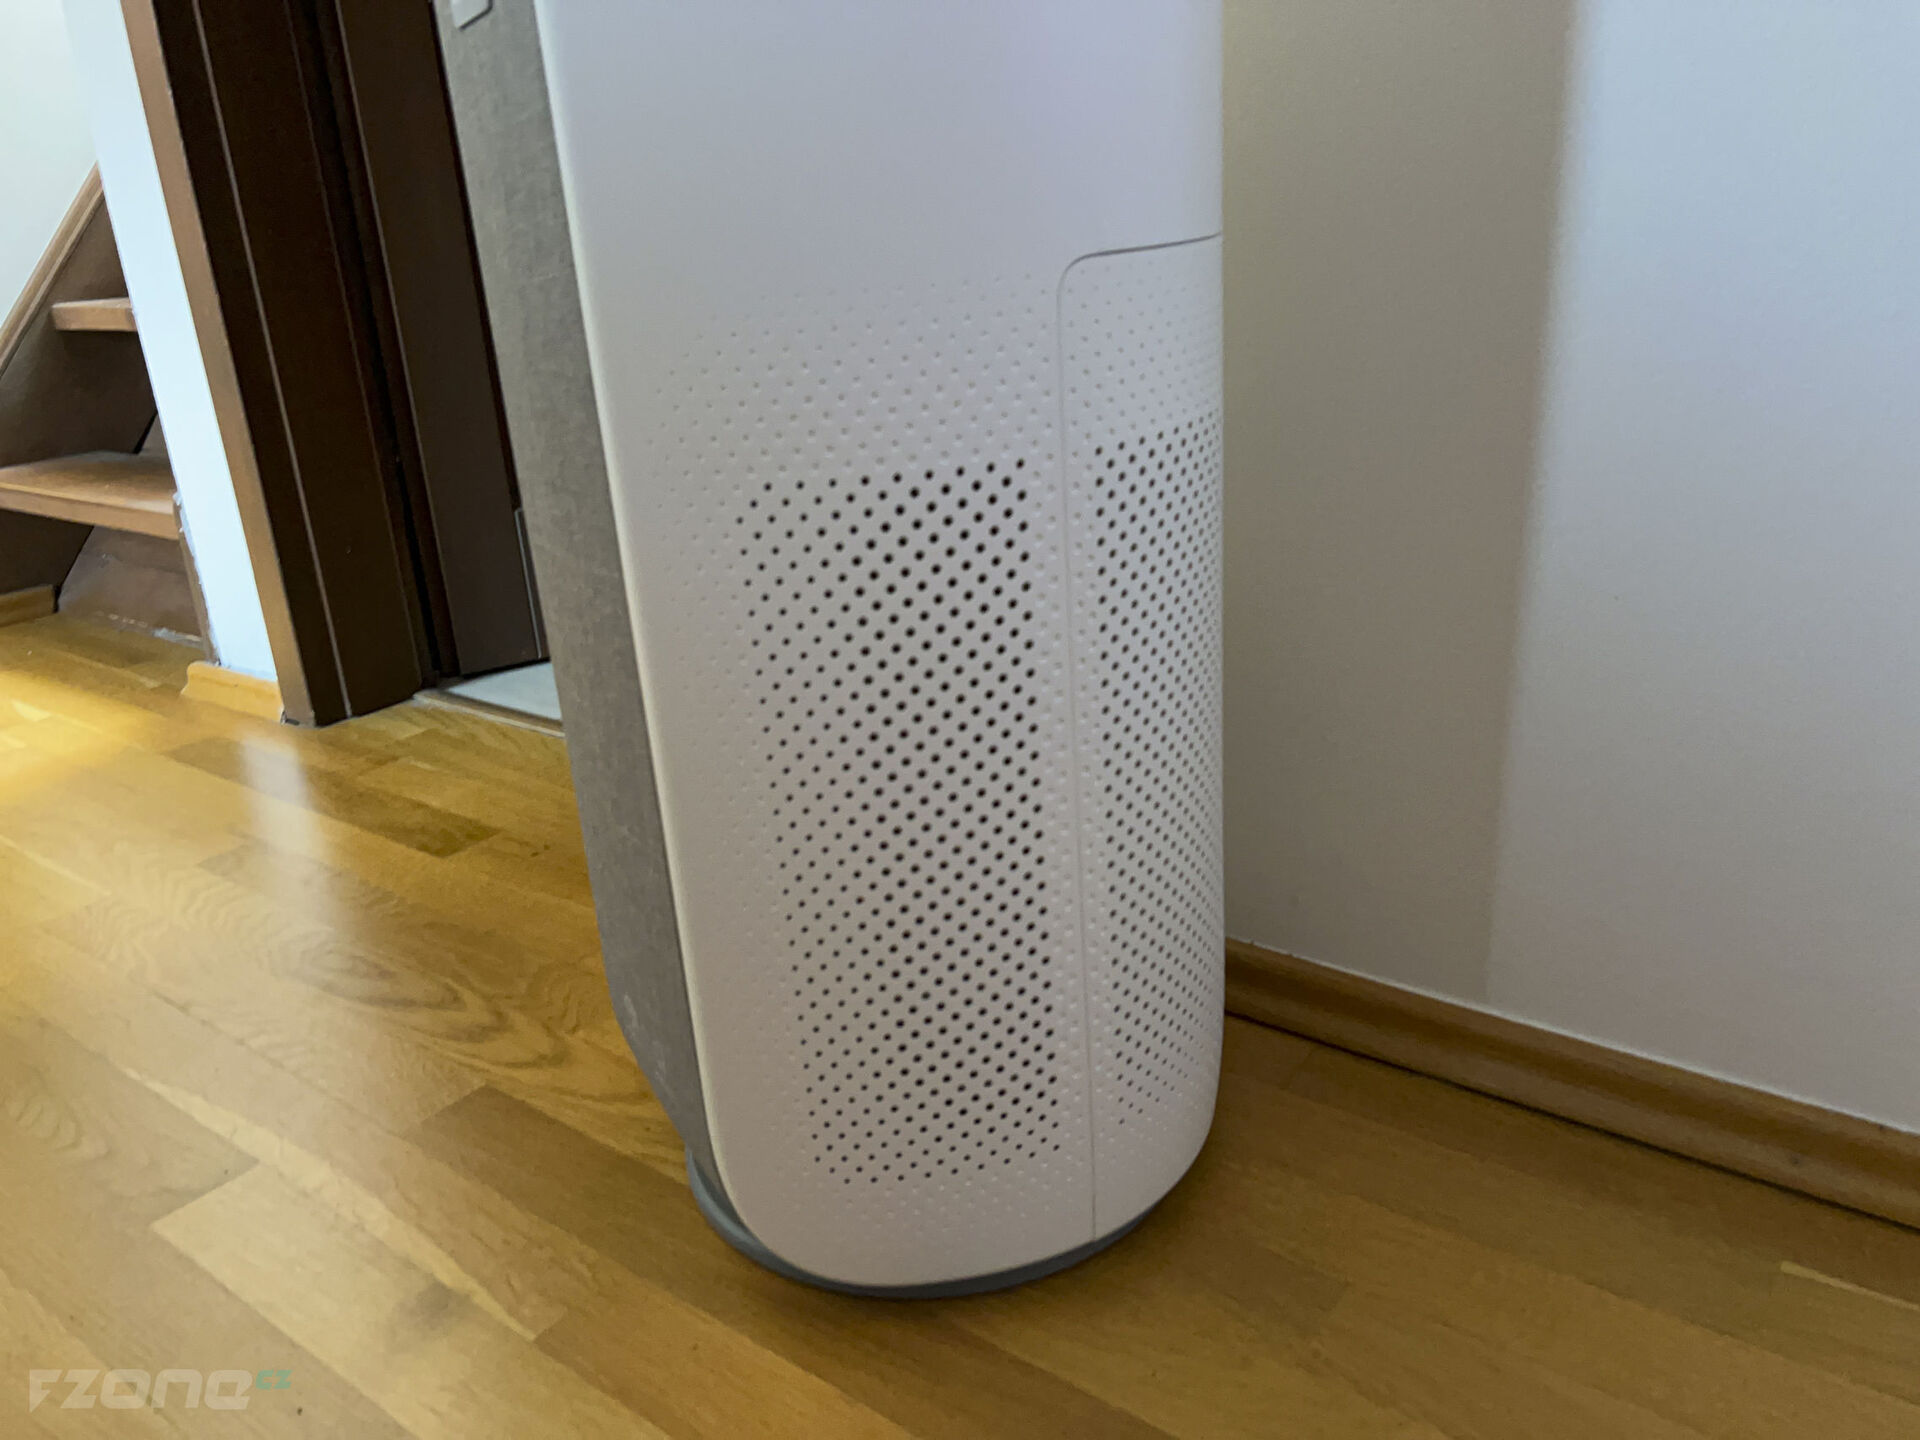 Philips Dual Scan AC3858/51